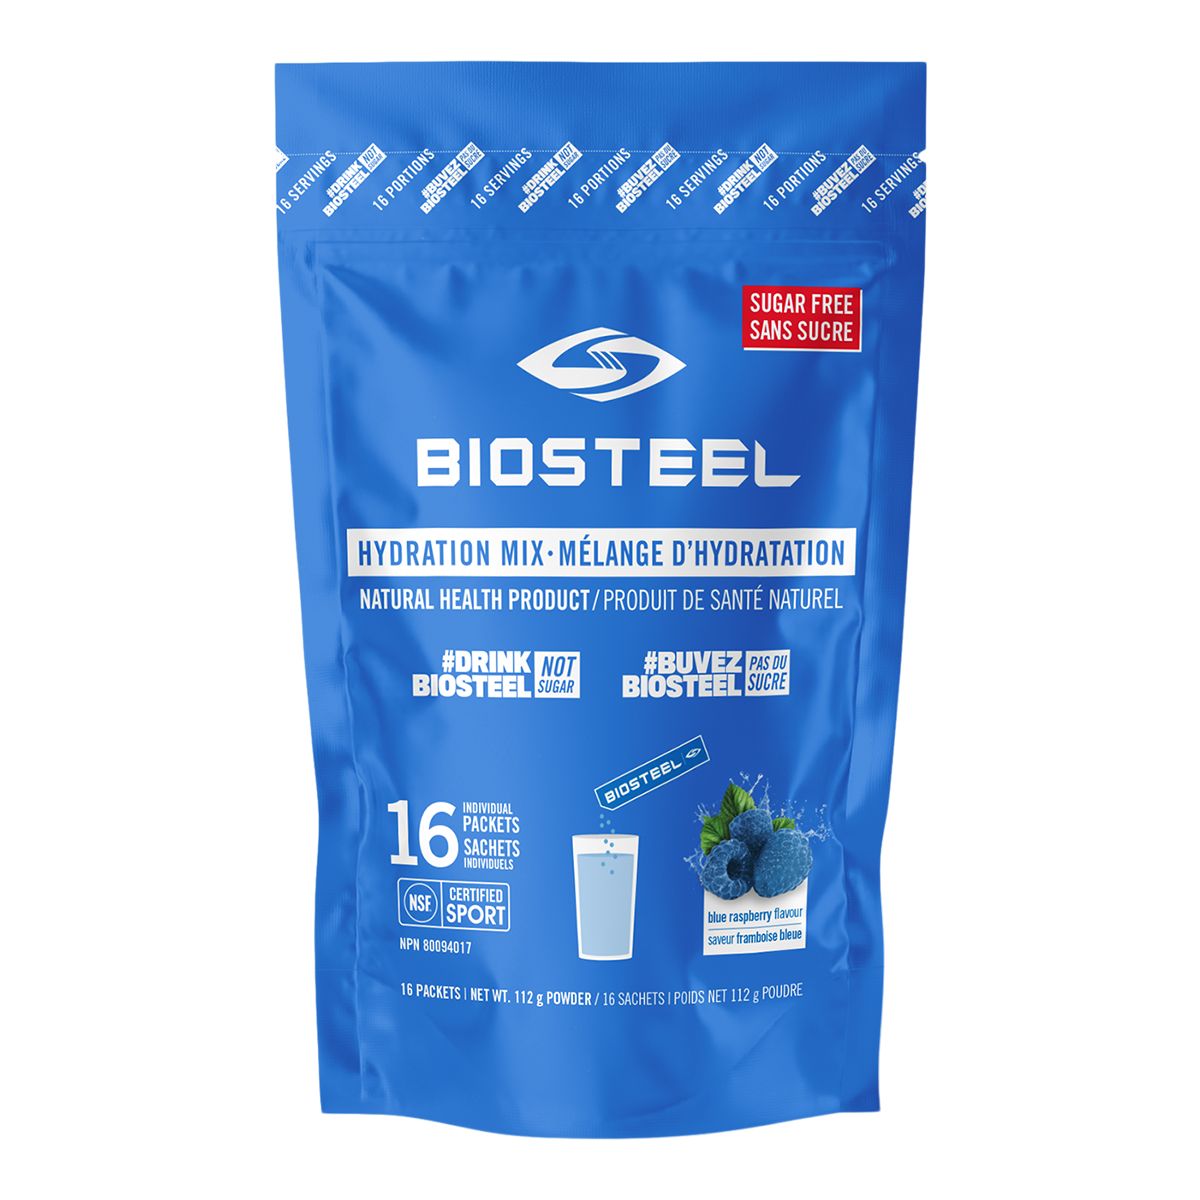 https://media-www.atmosphere.ca/product/div-01-hardgoods/dpt-40-protein-vitamins-supplements/sdpt-12-protein-and-active-lifestyle/333536309/biosteel-hydration-mix-16ct-b-blue-raspberry-n-s--4a919ab5-db1f-4b55-8105-4d586d29e96d-jpgrendition.jpg